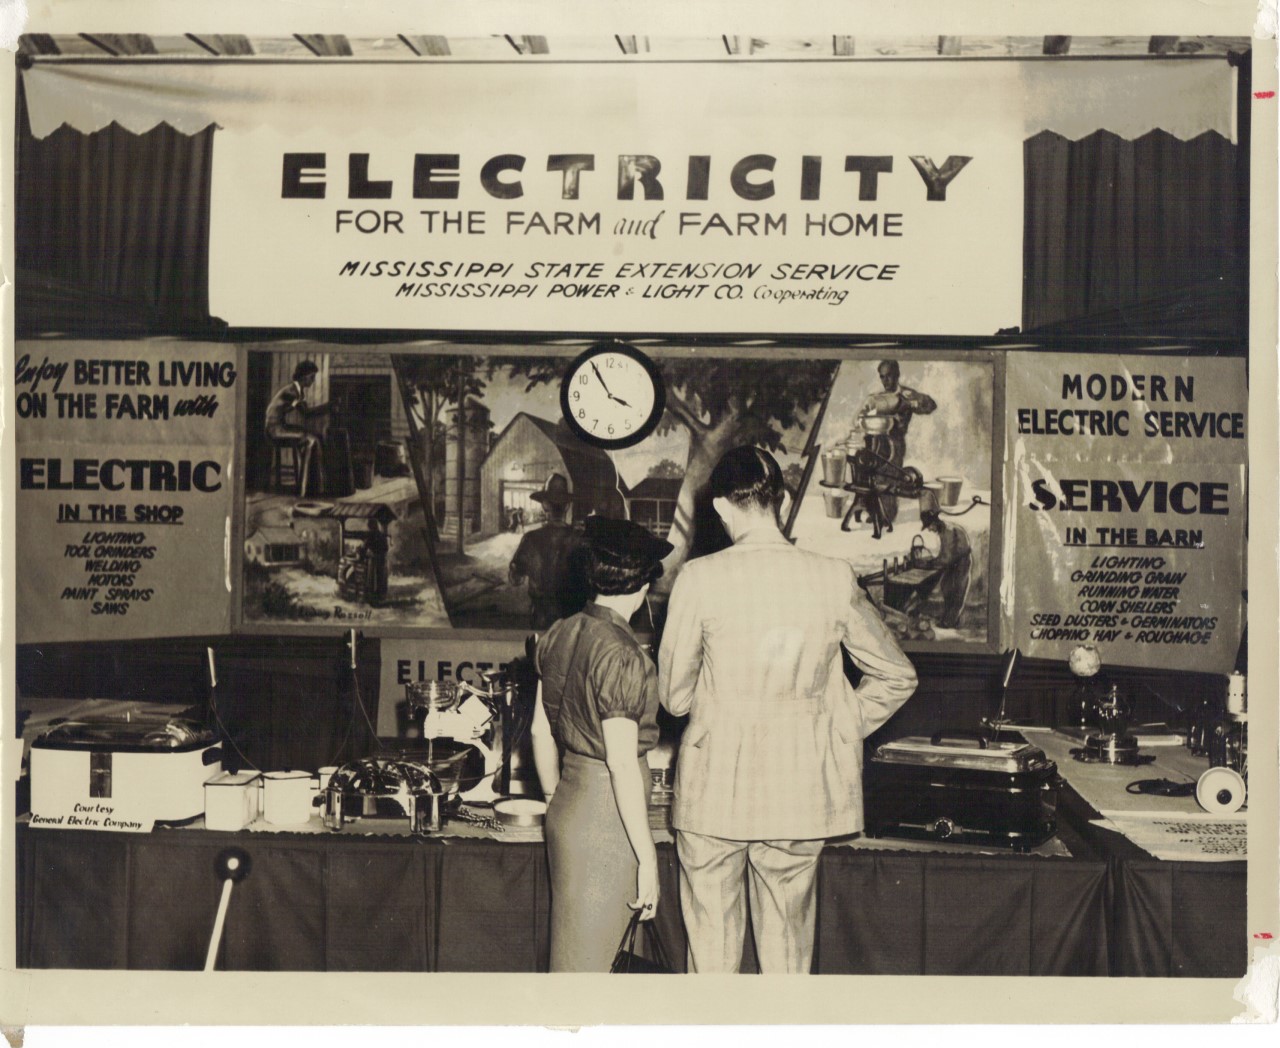 Entergy Mississippi's state fair booth shows customers how to efficiently use electricity for the future.